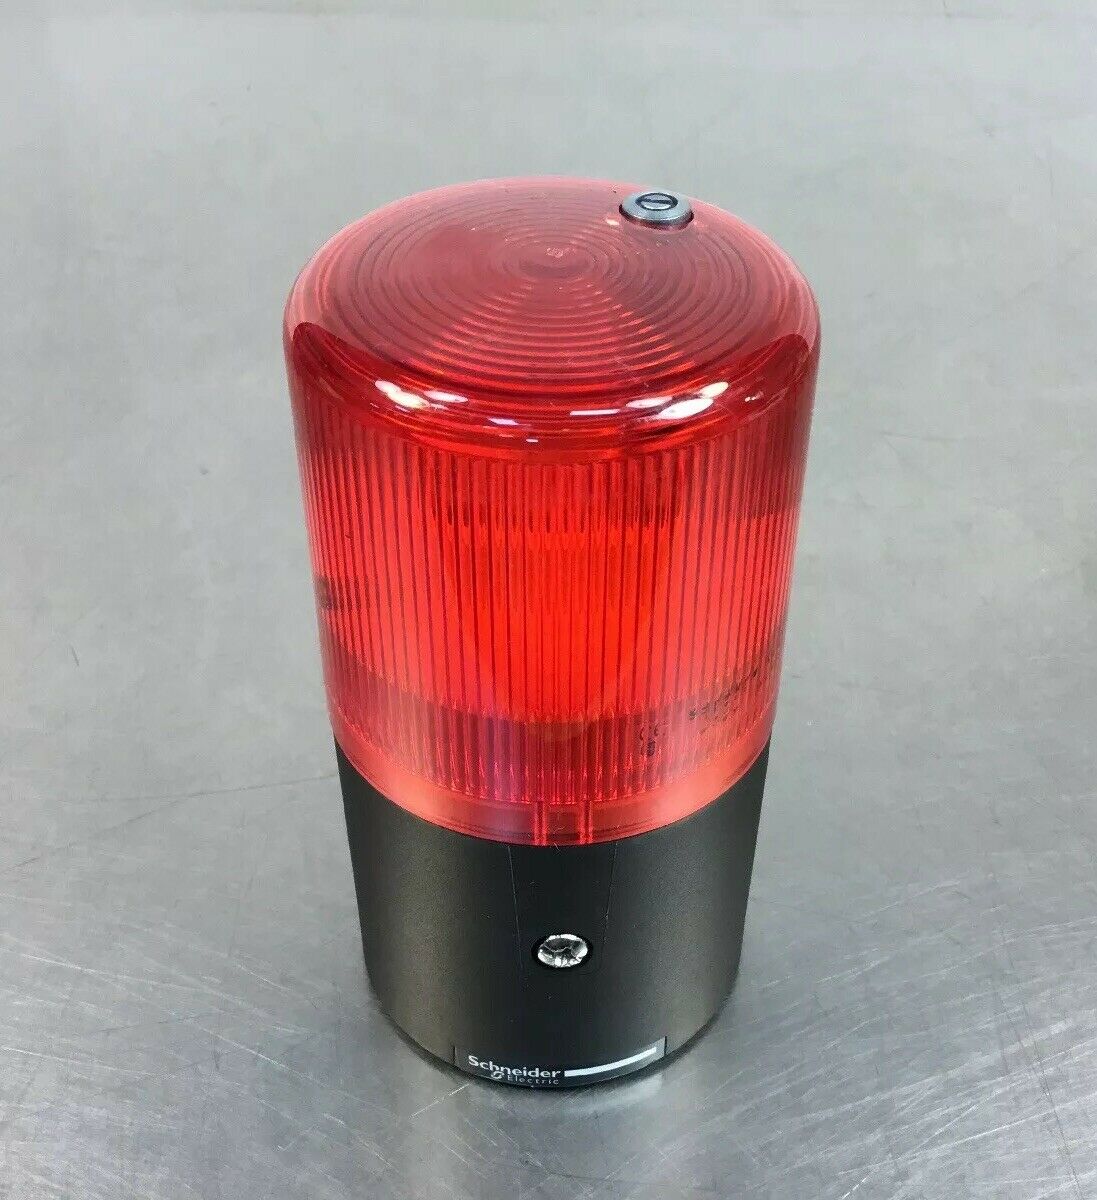 SCHNEIDER ELECTRIC XVDL34 Red Beacon.    5D